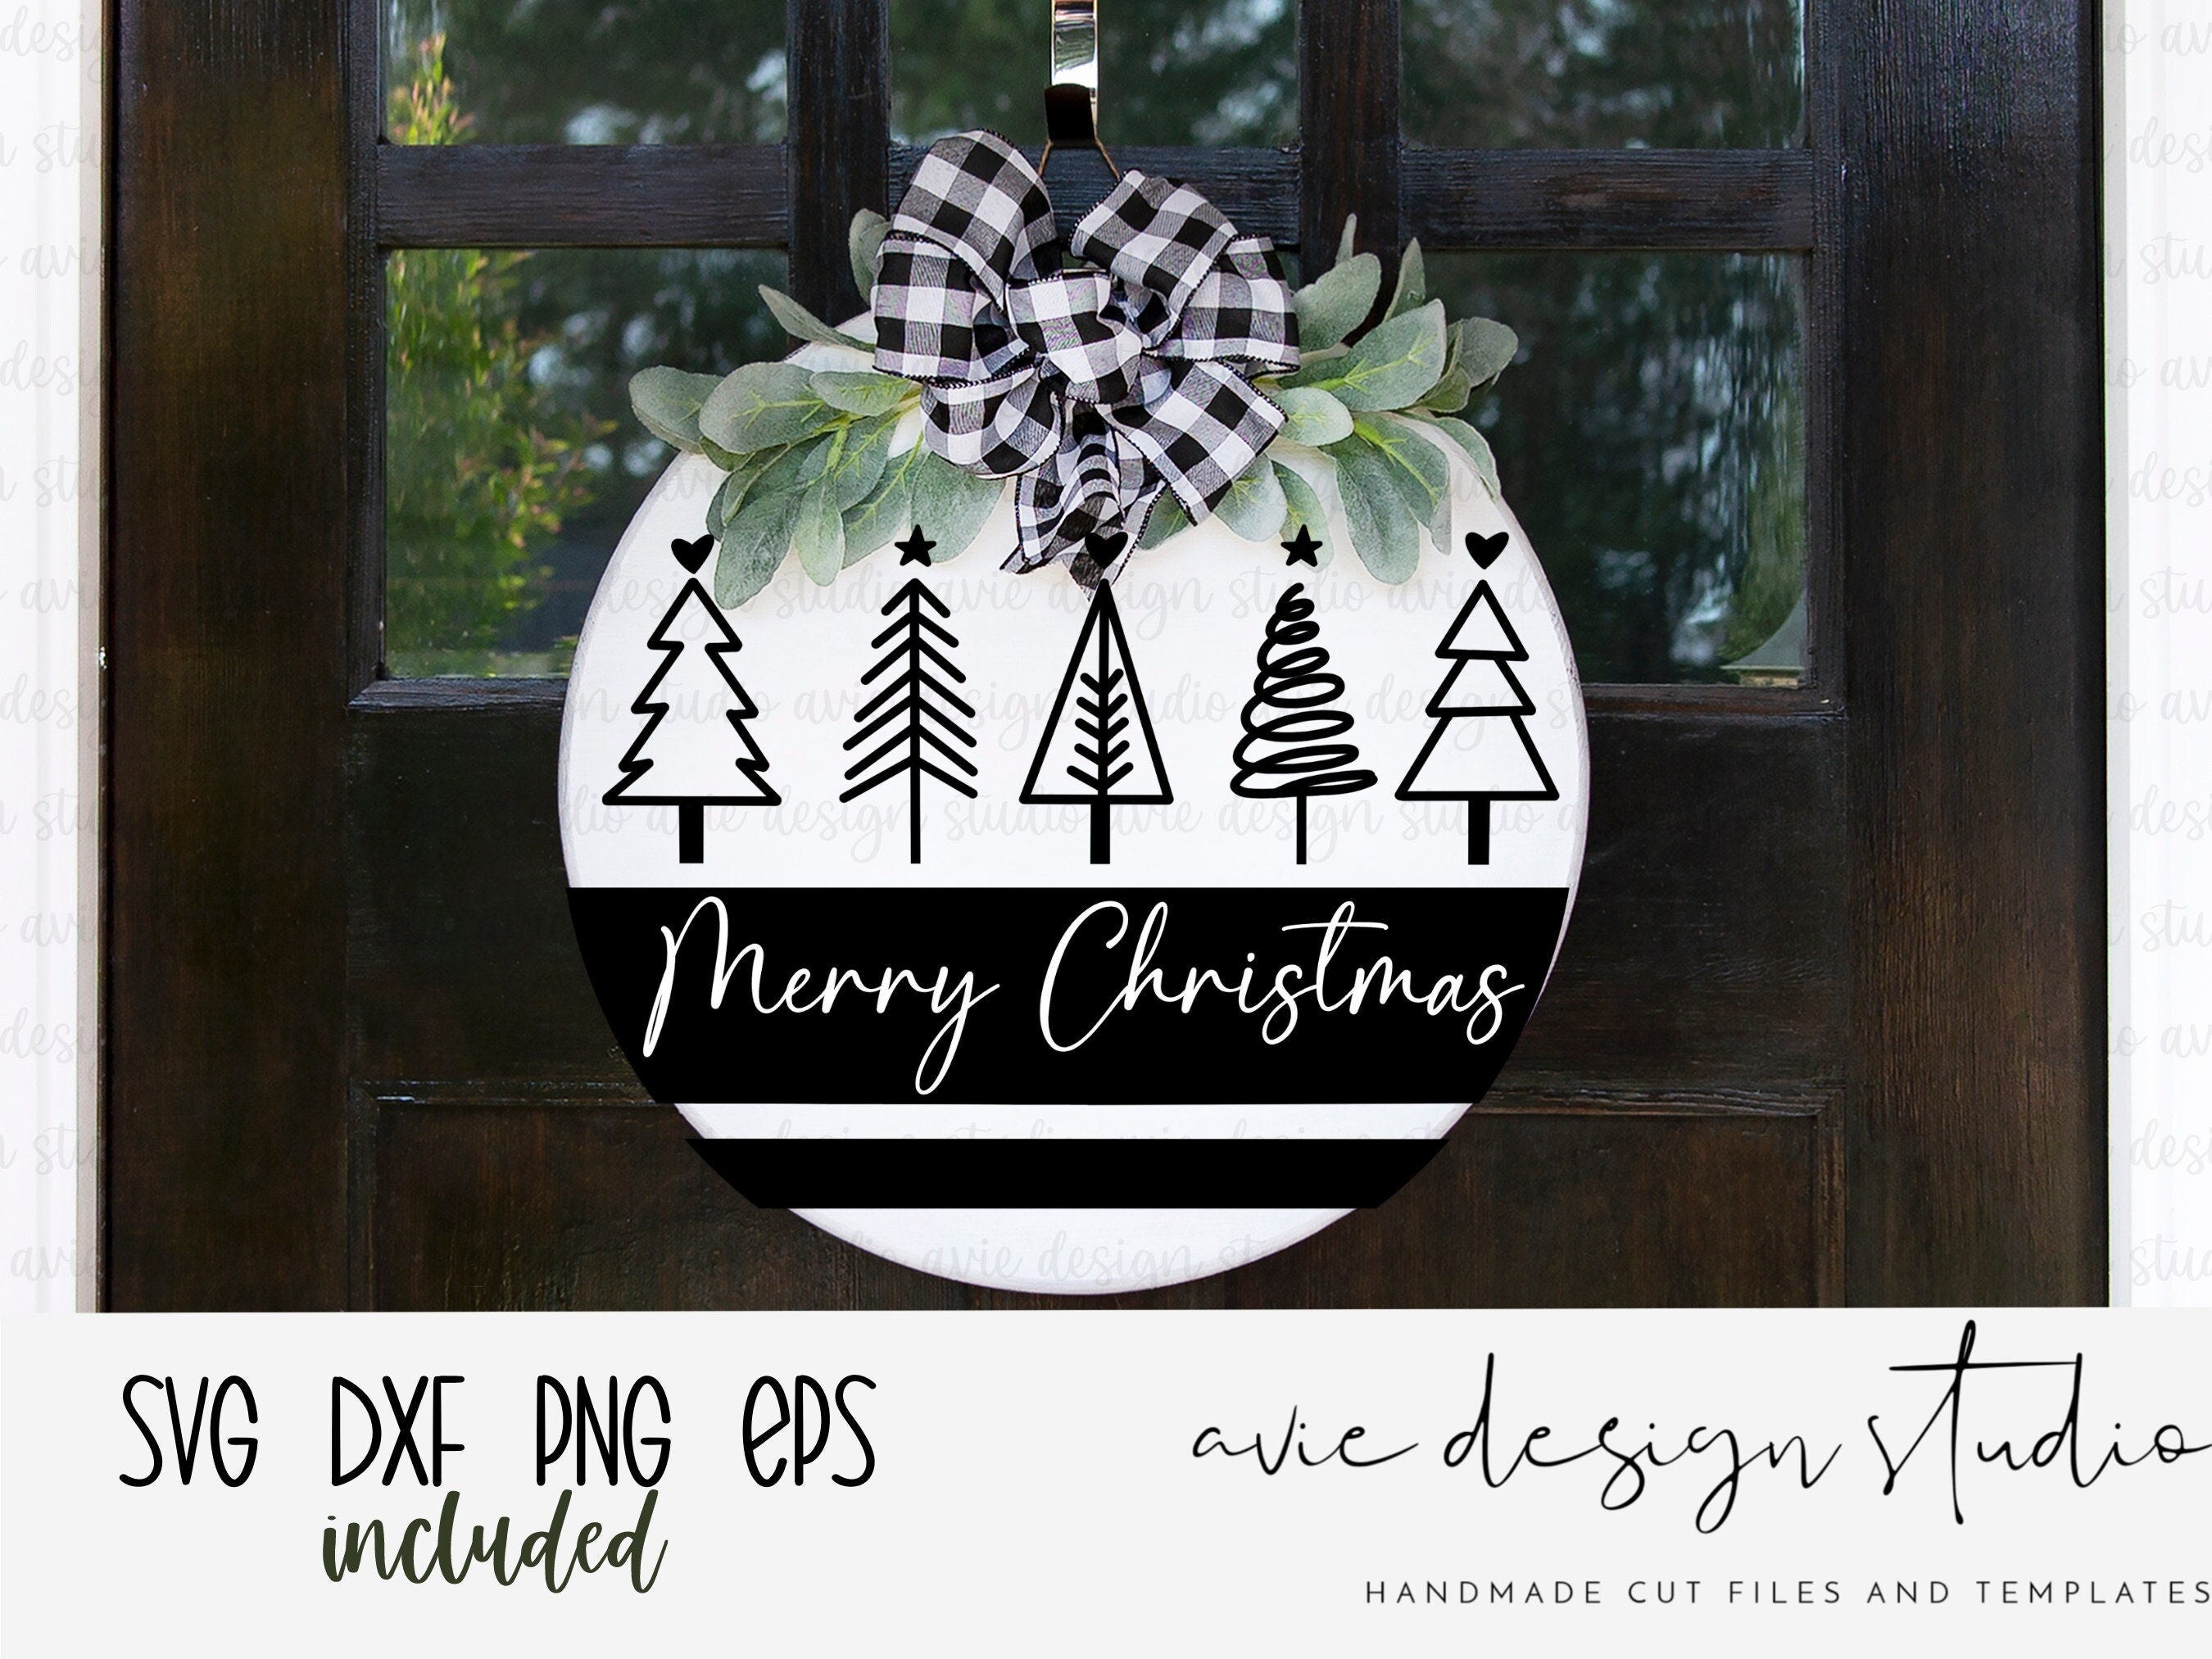 Merry christmas svg, christmas svg, door hanger svg, christmas tree svg, christmas welcome sign svg, round sign svg, holiday svg, dxf, png